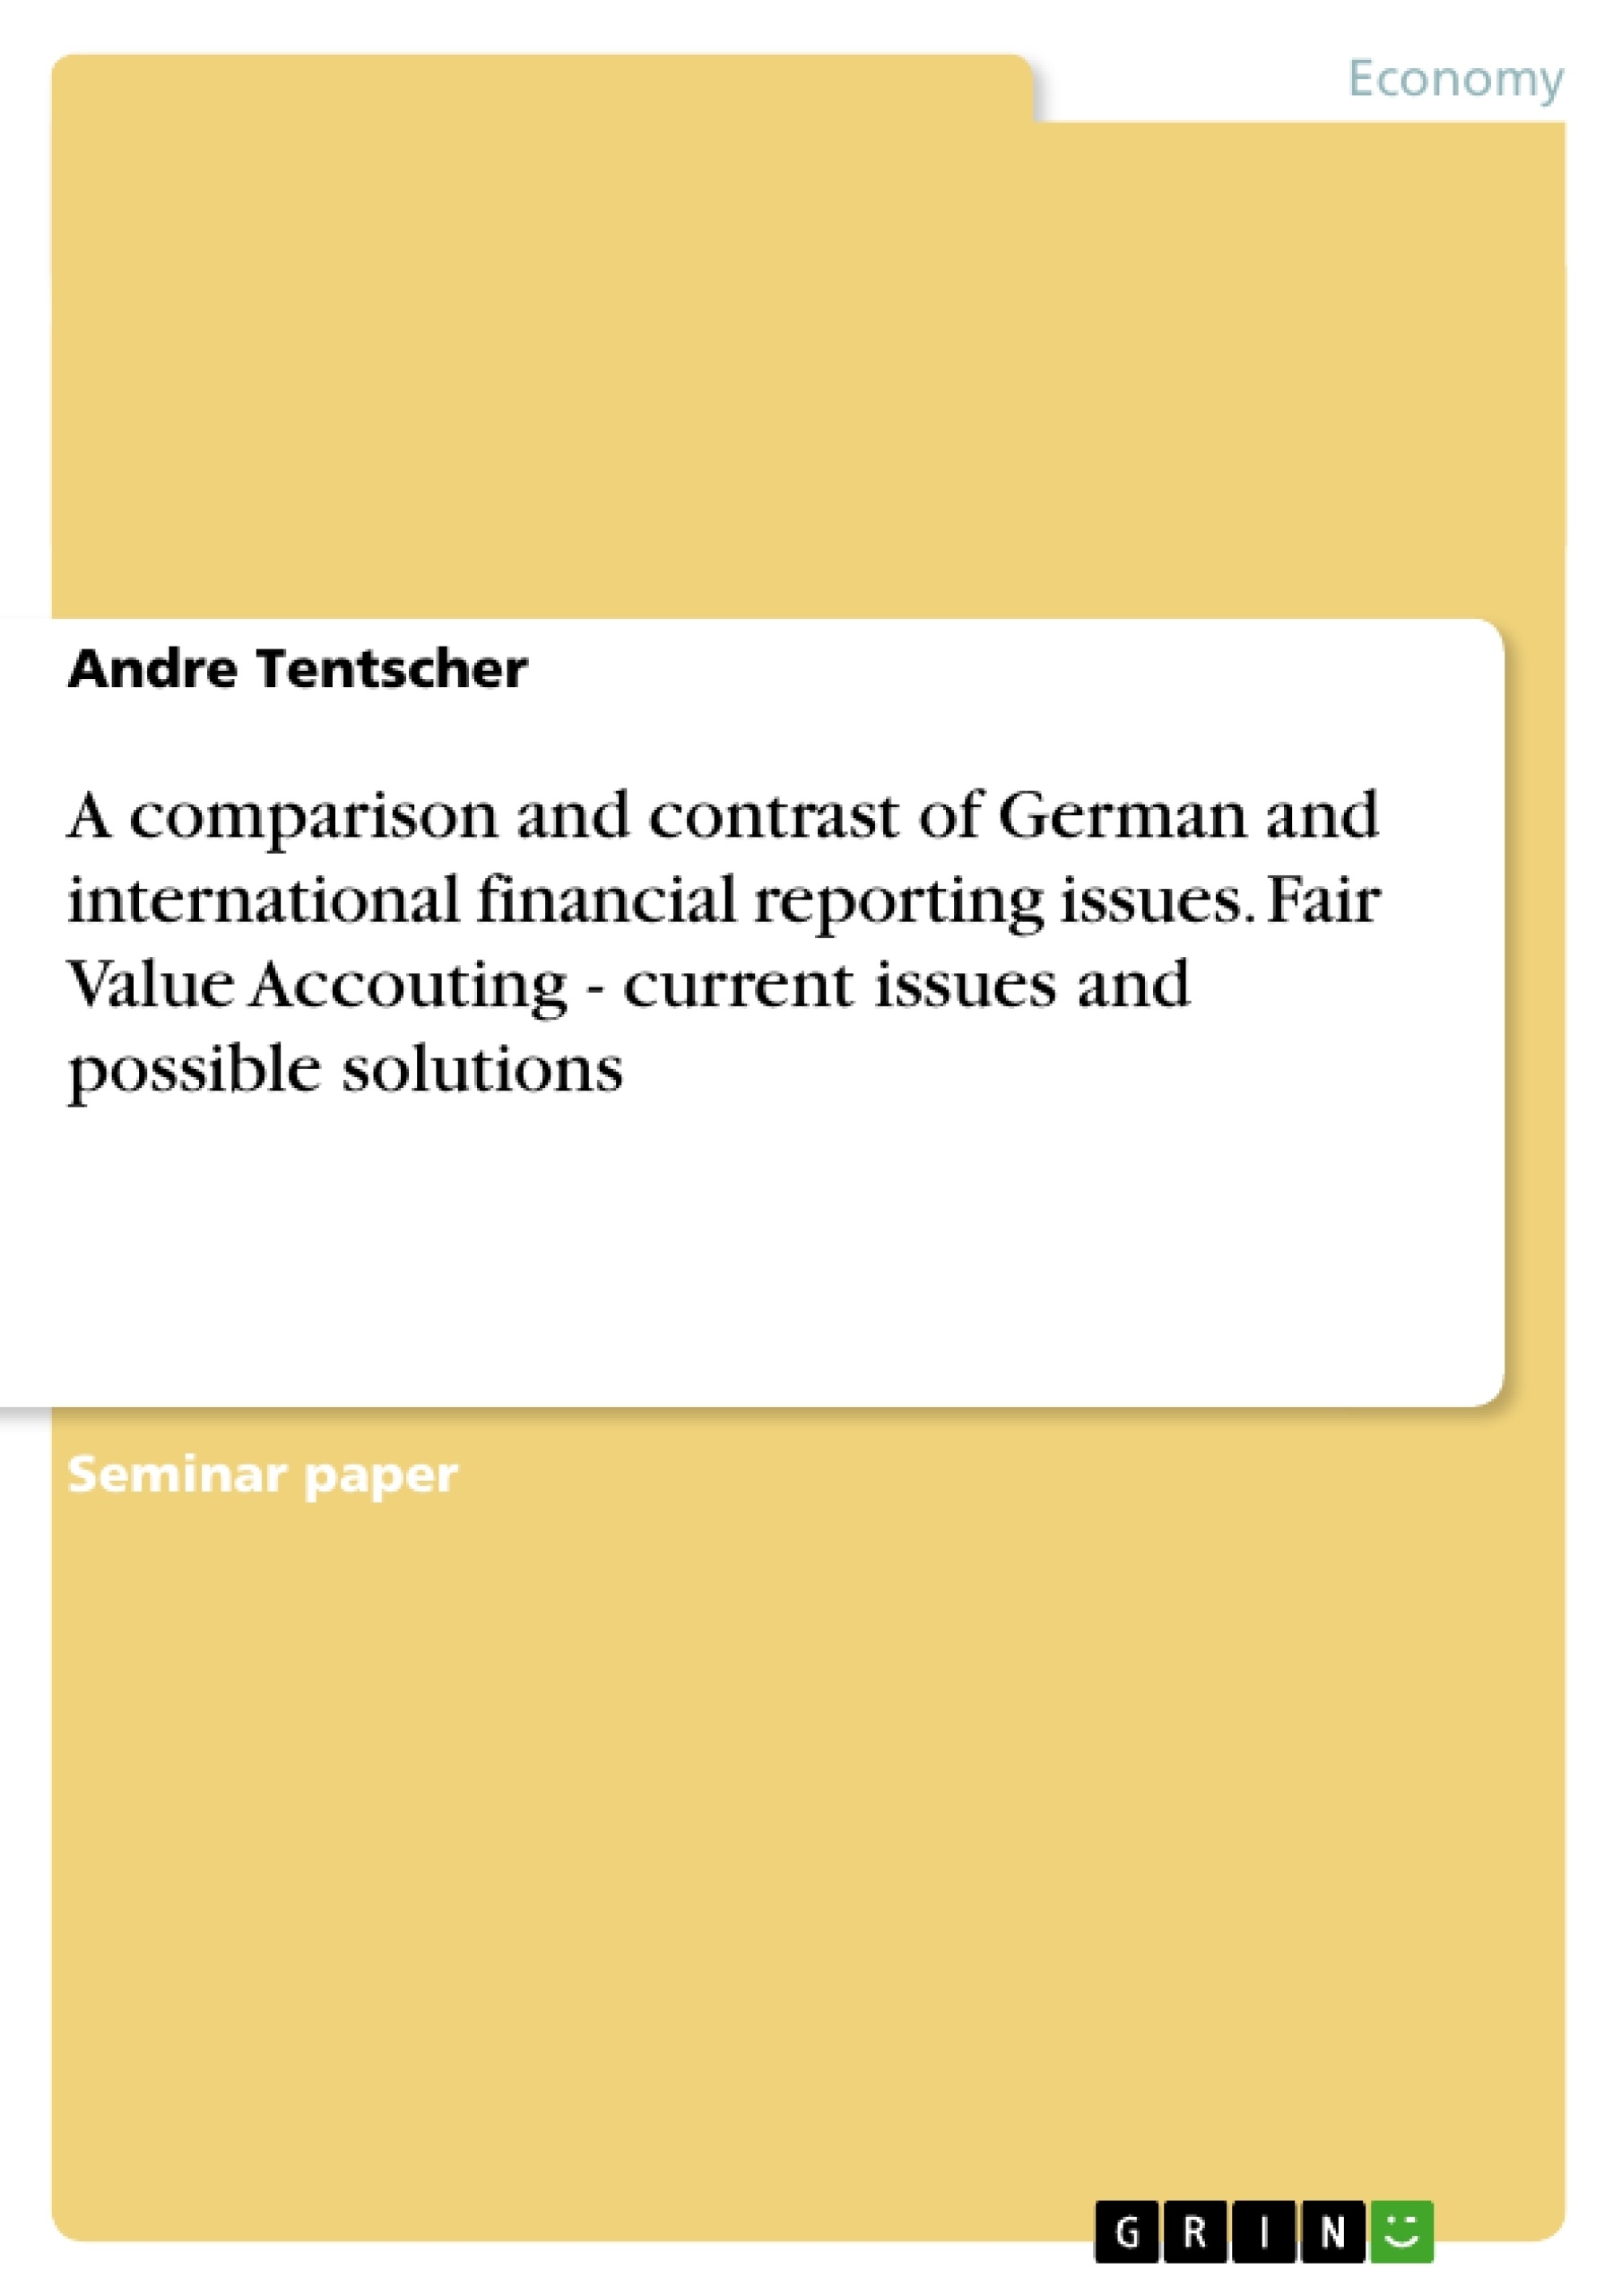 Title: A comparison and contrast of German and international financial reporting issues. Fair Value Accouting - current issues and possible solutions